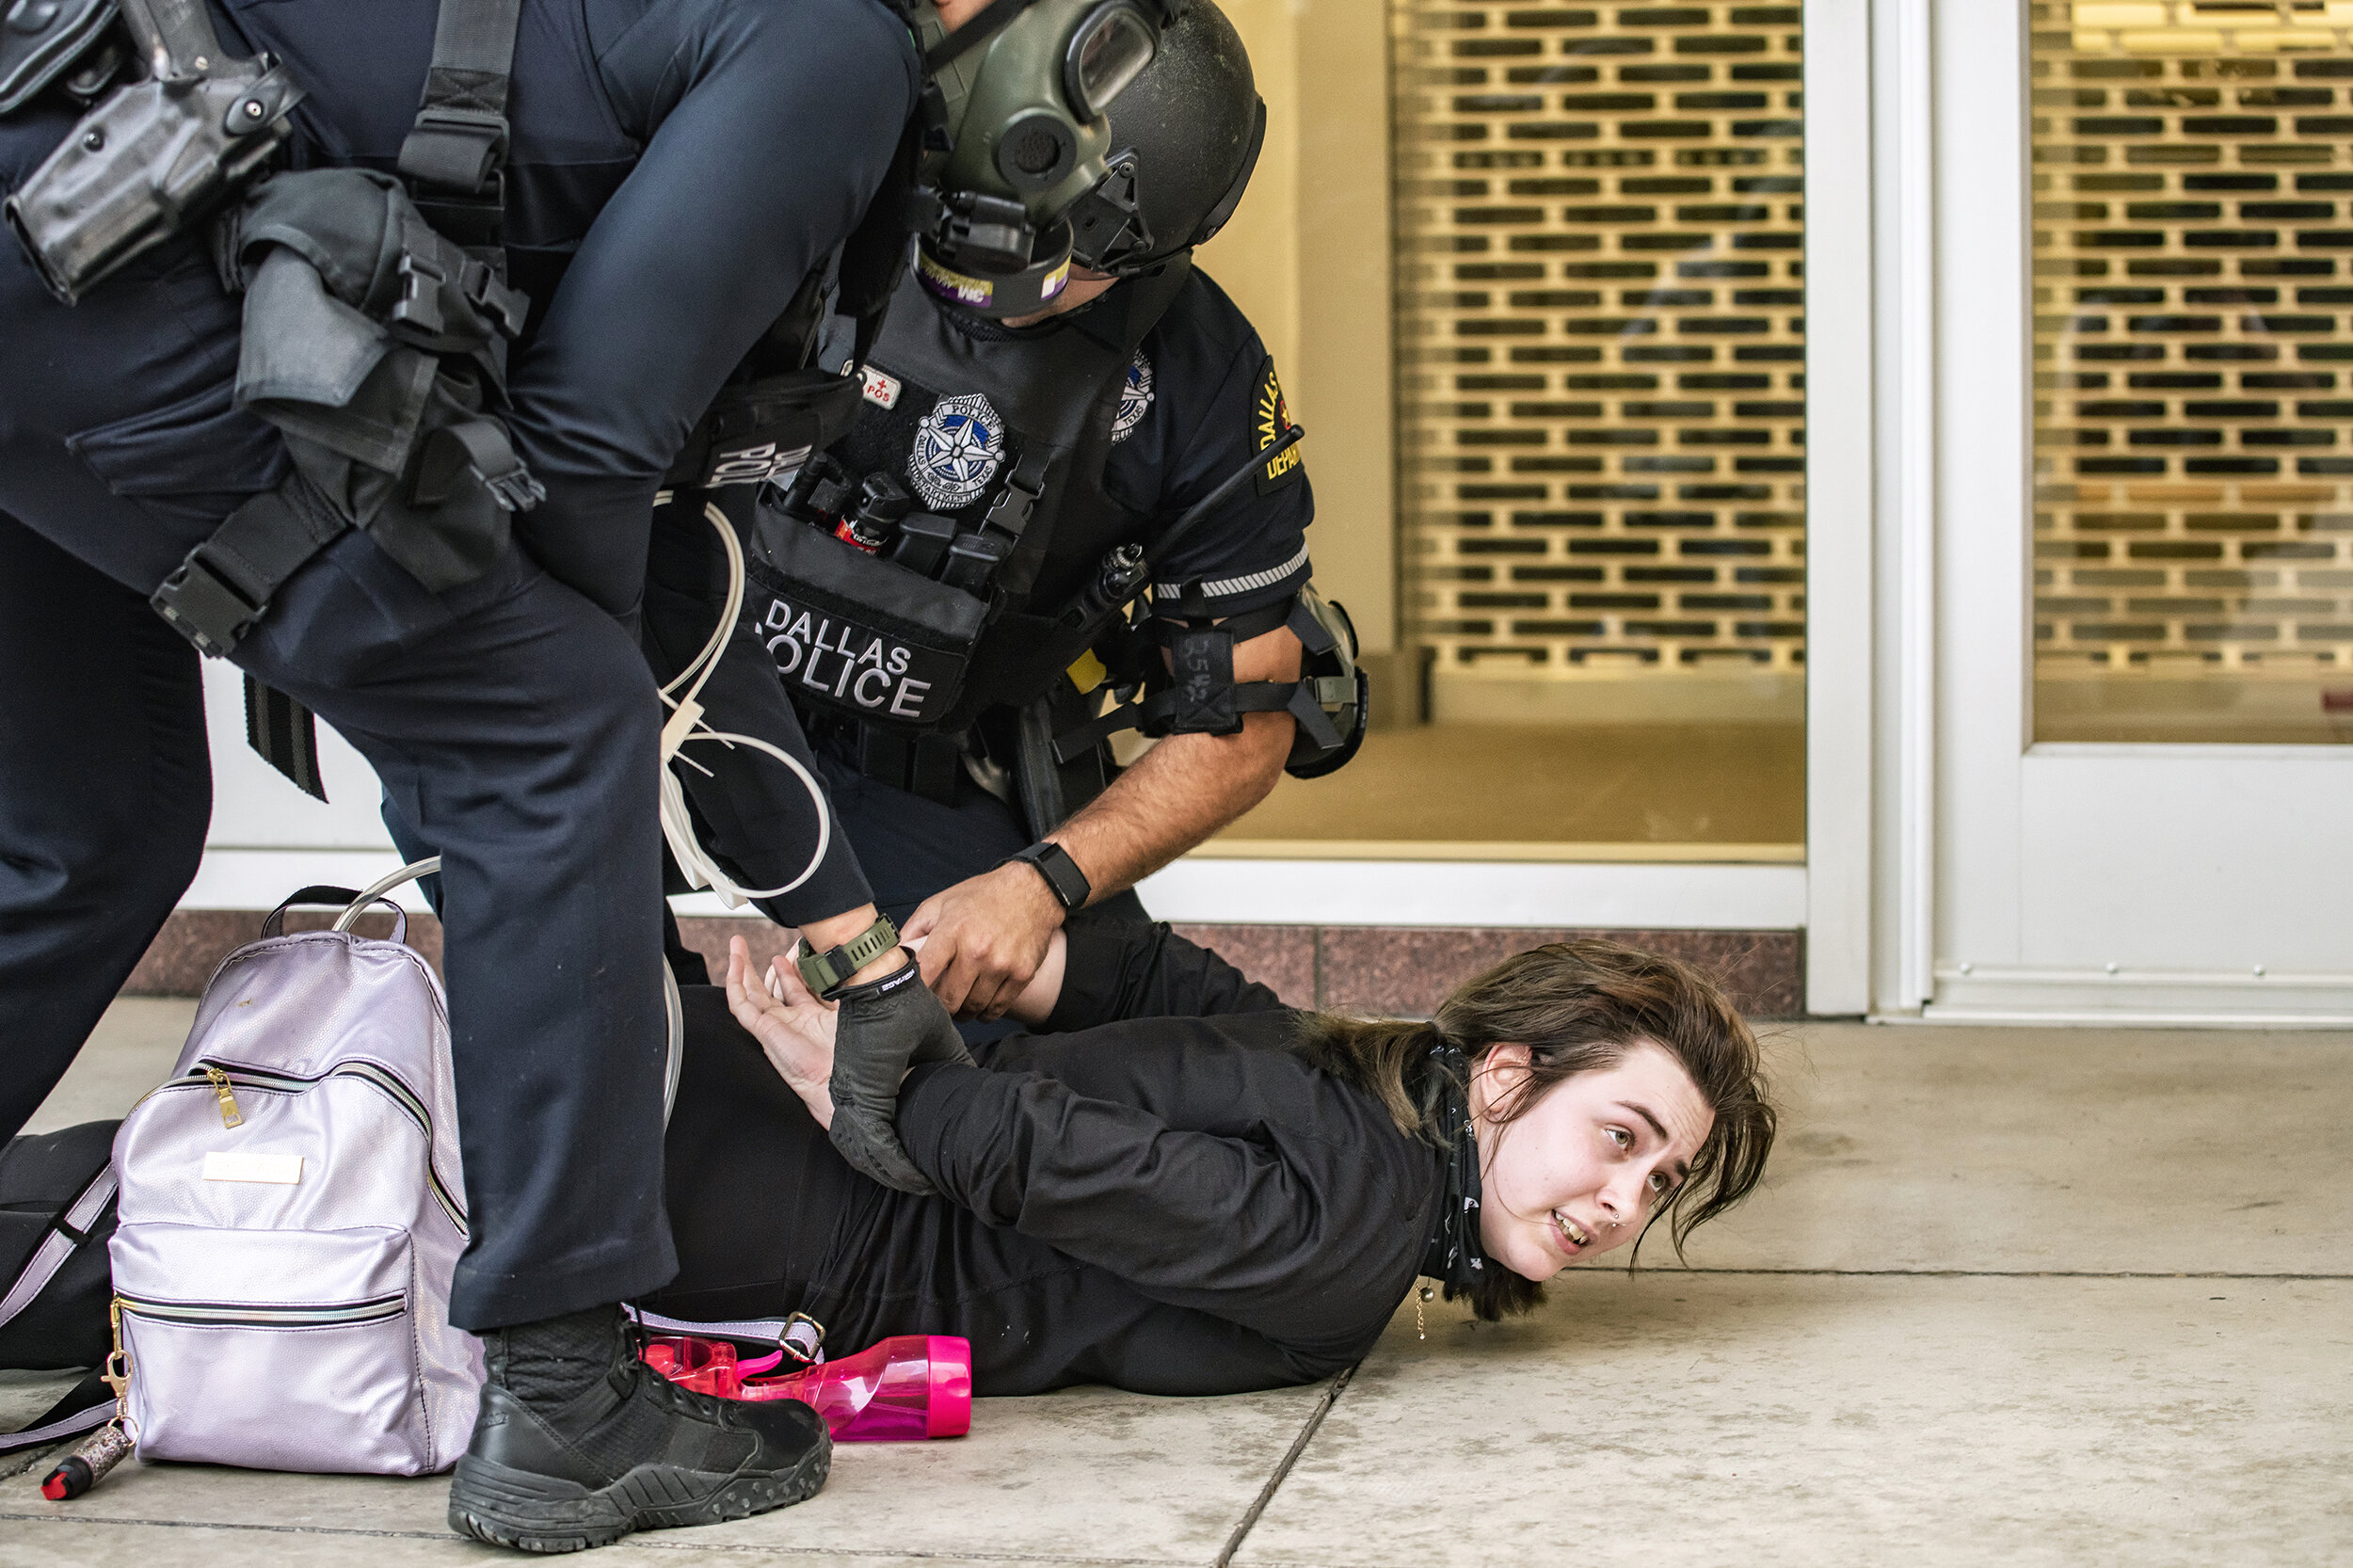  A protester is zip-tied by Dallas police in the 300 block of North St. Paul Street in downtown Dallas, TX on May 31, 2020.   Despite a peaceful protest march, once the 7 p.m. curfew commenced, police fired chemical agents into some crowds before mak